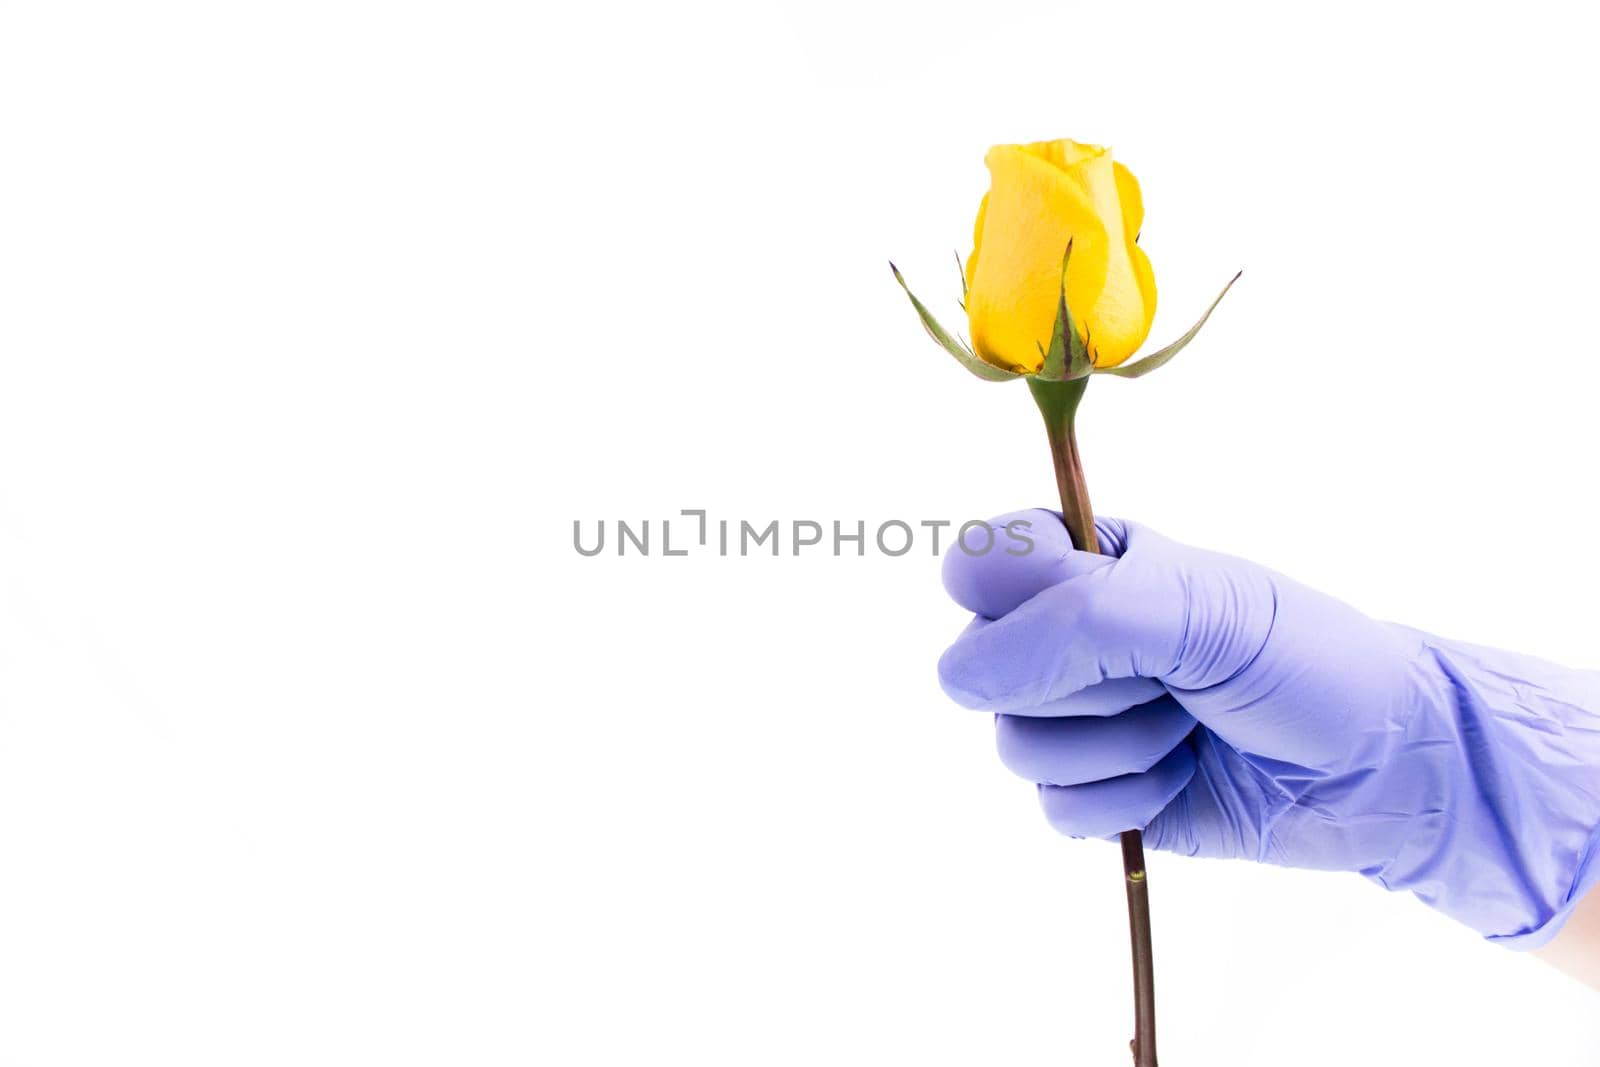 Hand in a surgical glove holds yellow rose isolated on white background.